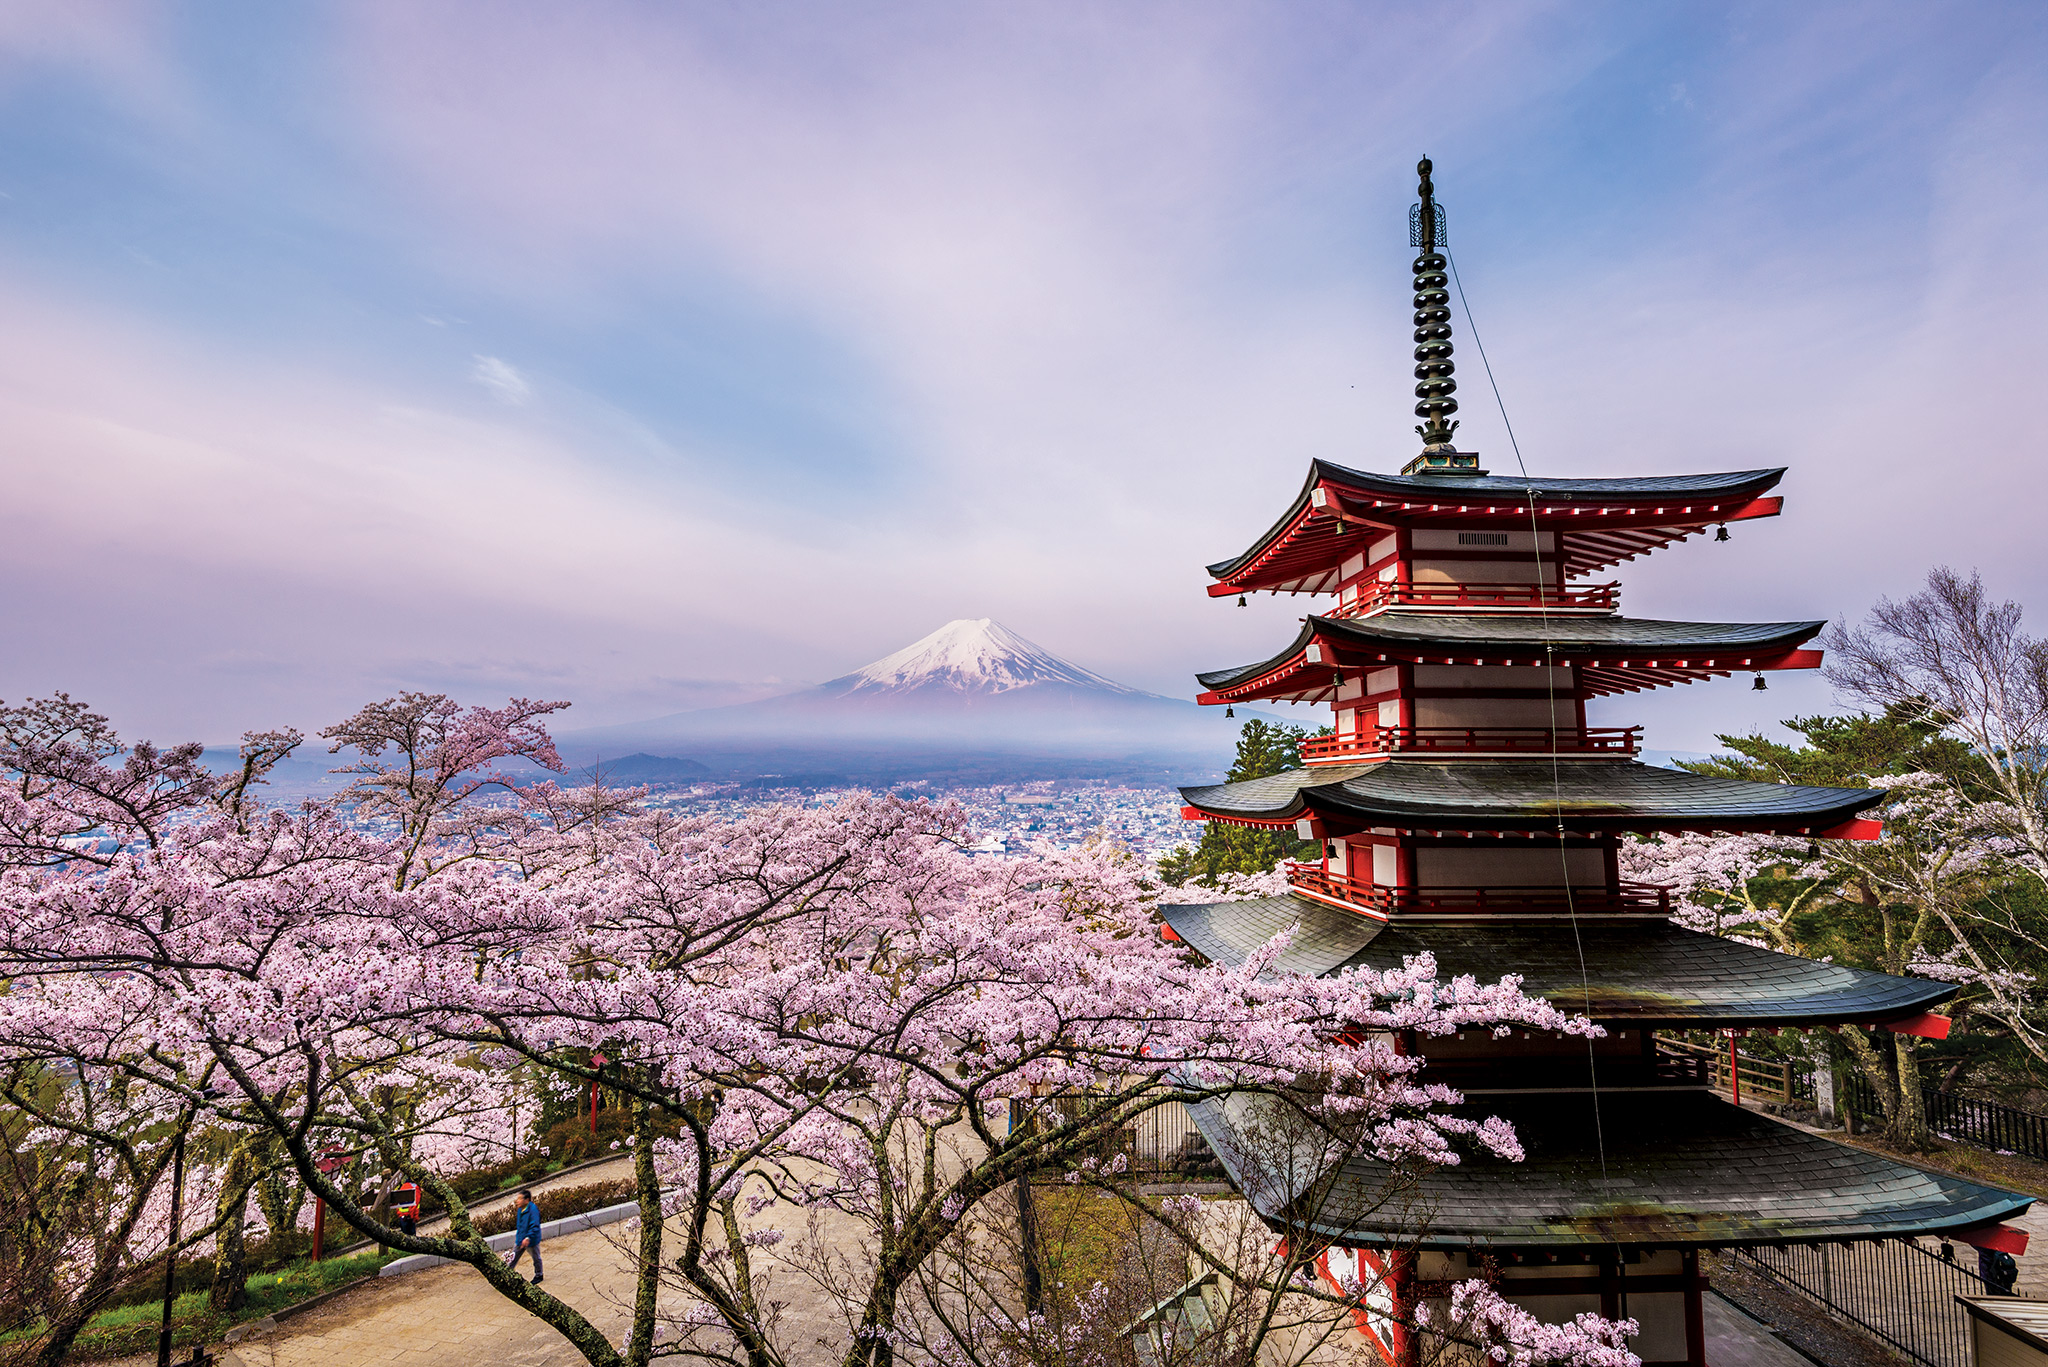 This Man Has Photographed Mount Fuji for Seven Years